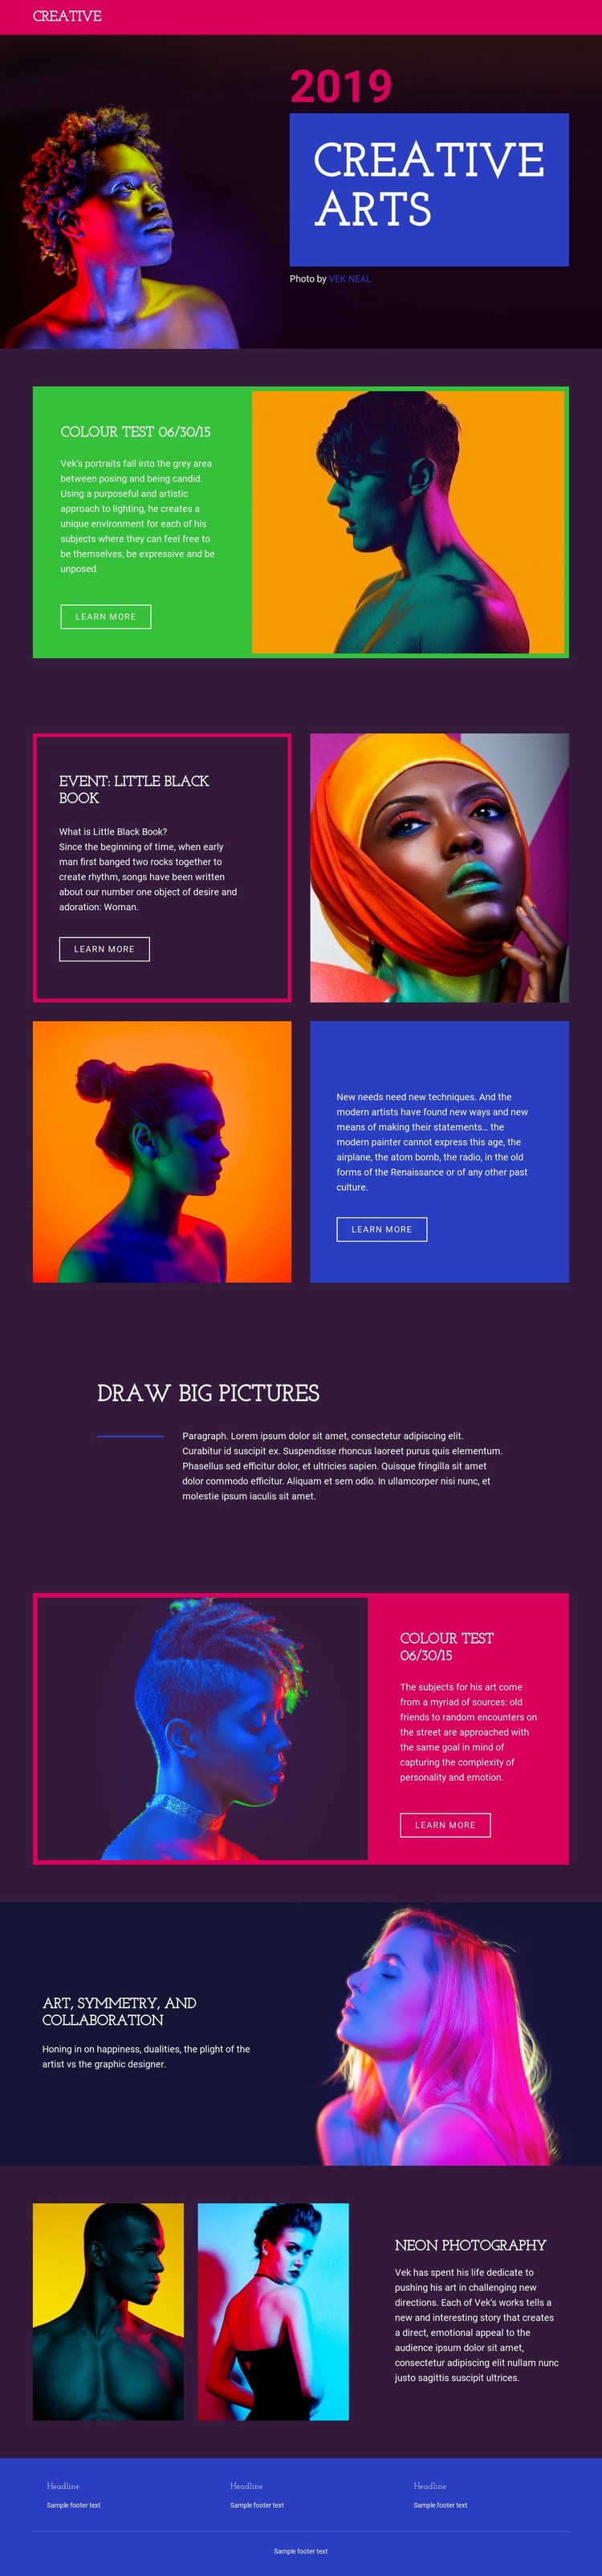 Limited-edition photography Static Site Generator